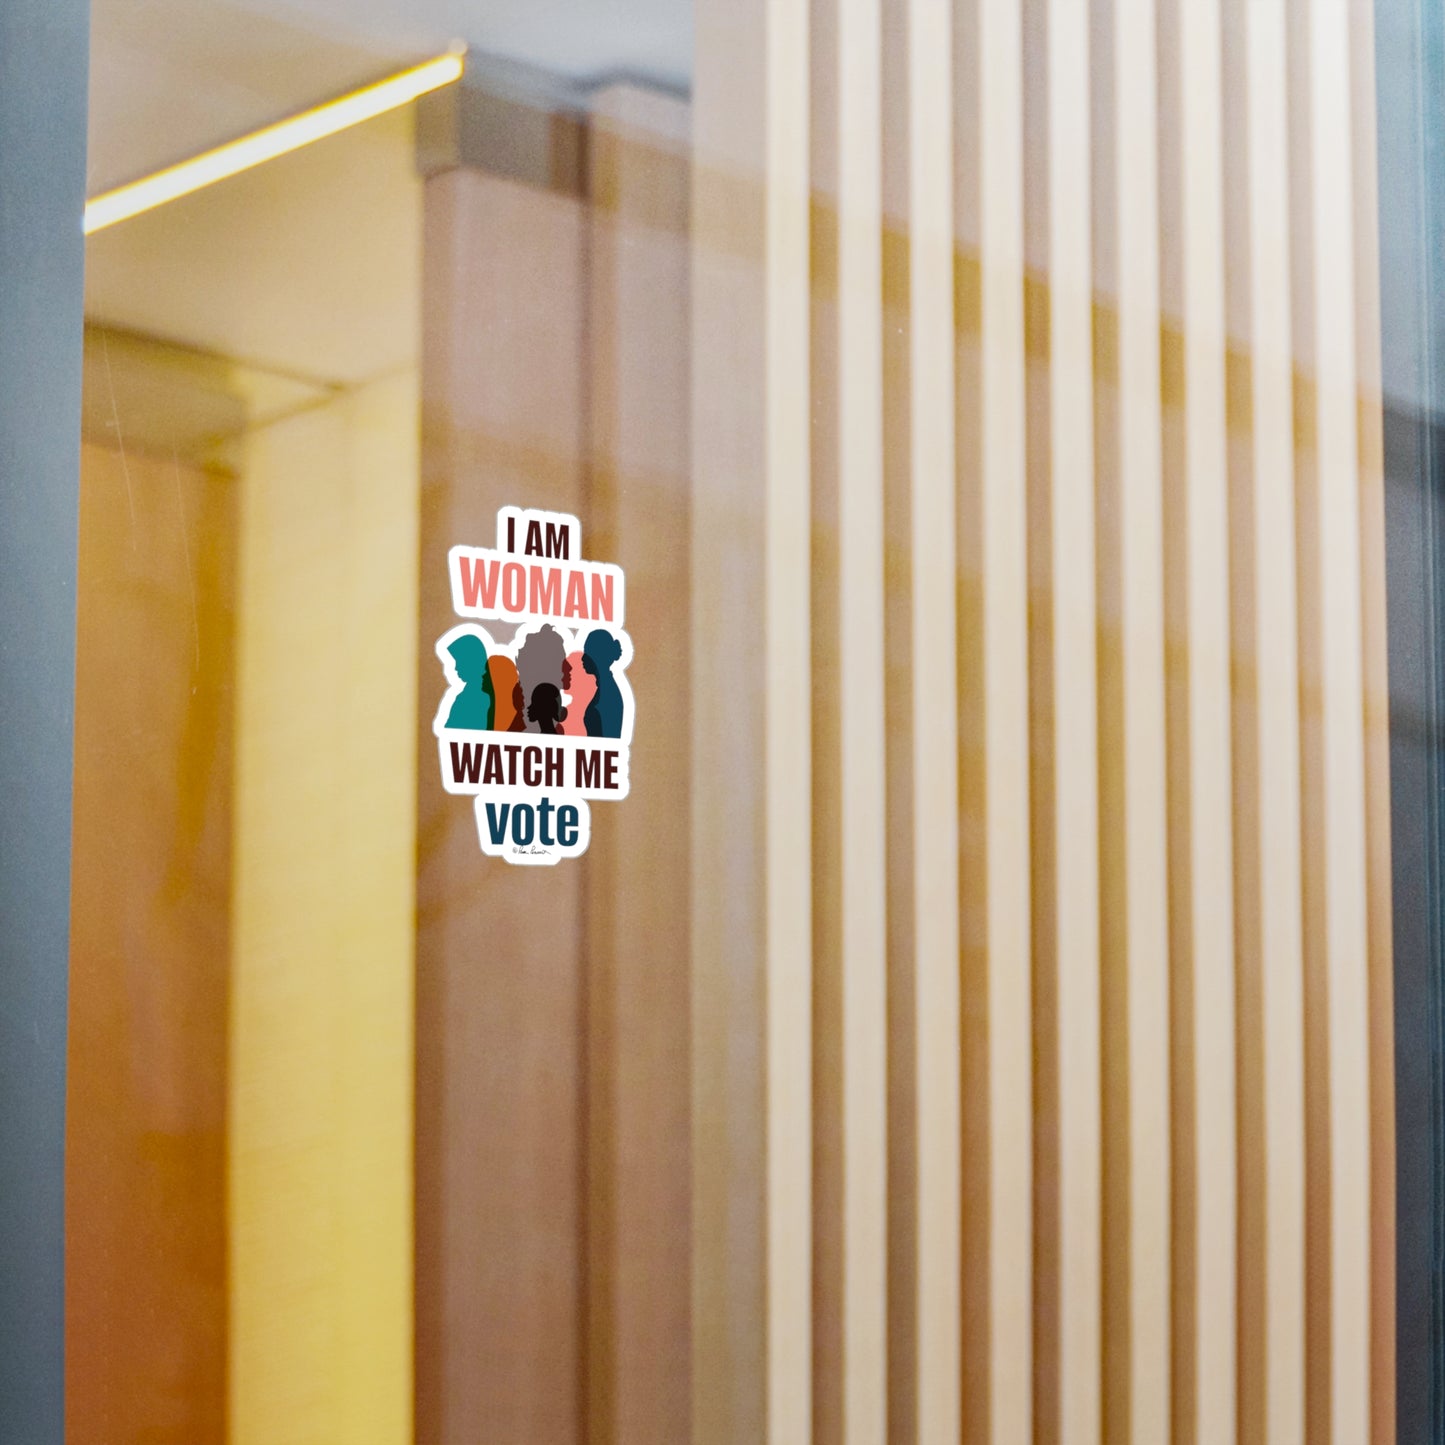 Sticker on a glass door reading "i am woman watch me vote" with silhouettes of three women, set against a background of vertical blinds. The Printify Voting Women's Decals features removable adhesive and is made of white vinyl. Available in unisex and 4 sizes with graphics printed on it.